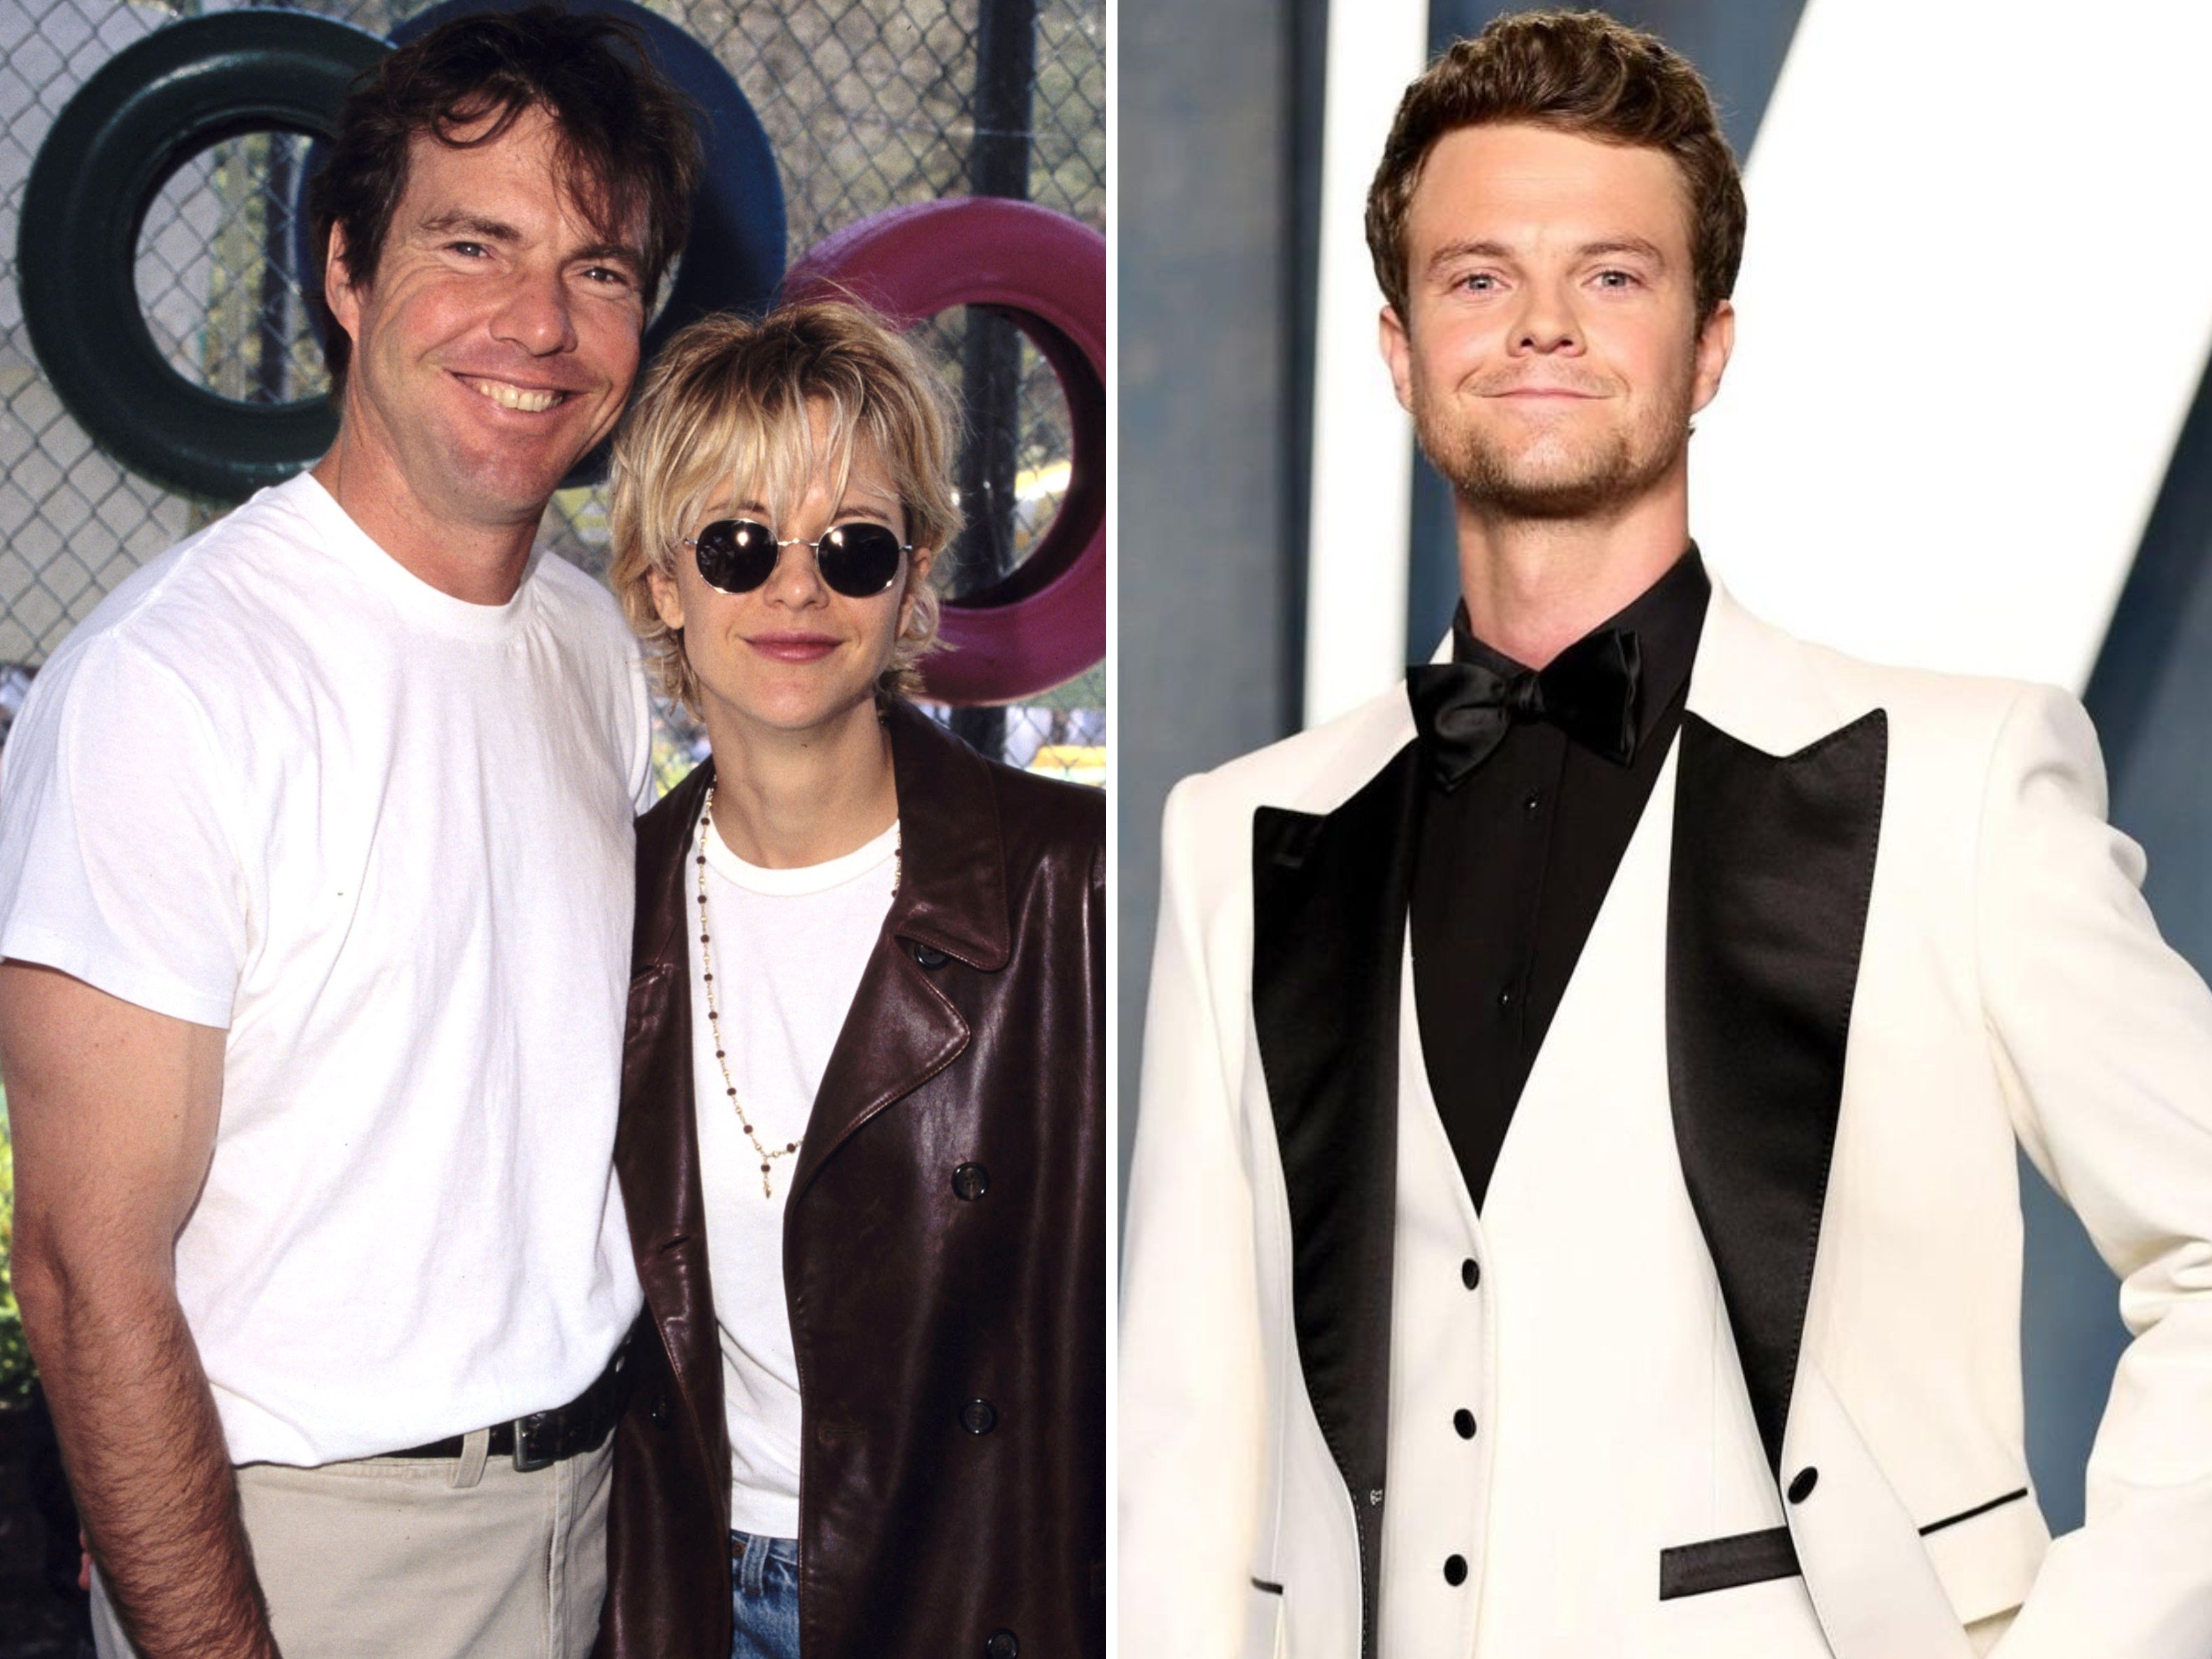 Jack Quaid is the son of actors Randy Quaid and Meg Ryan, who were married from 1991 to 2001. Photos: Getty Images, @jack_quaid/Instagram